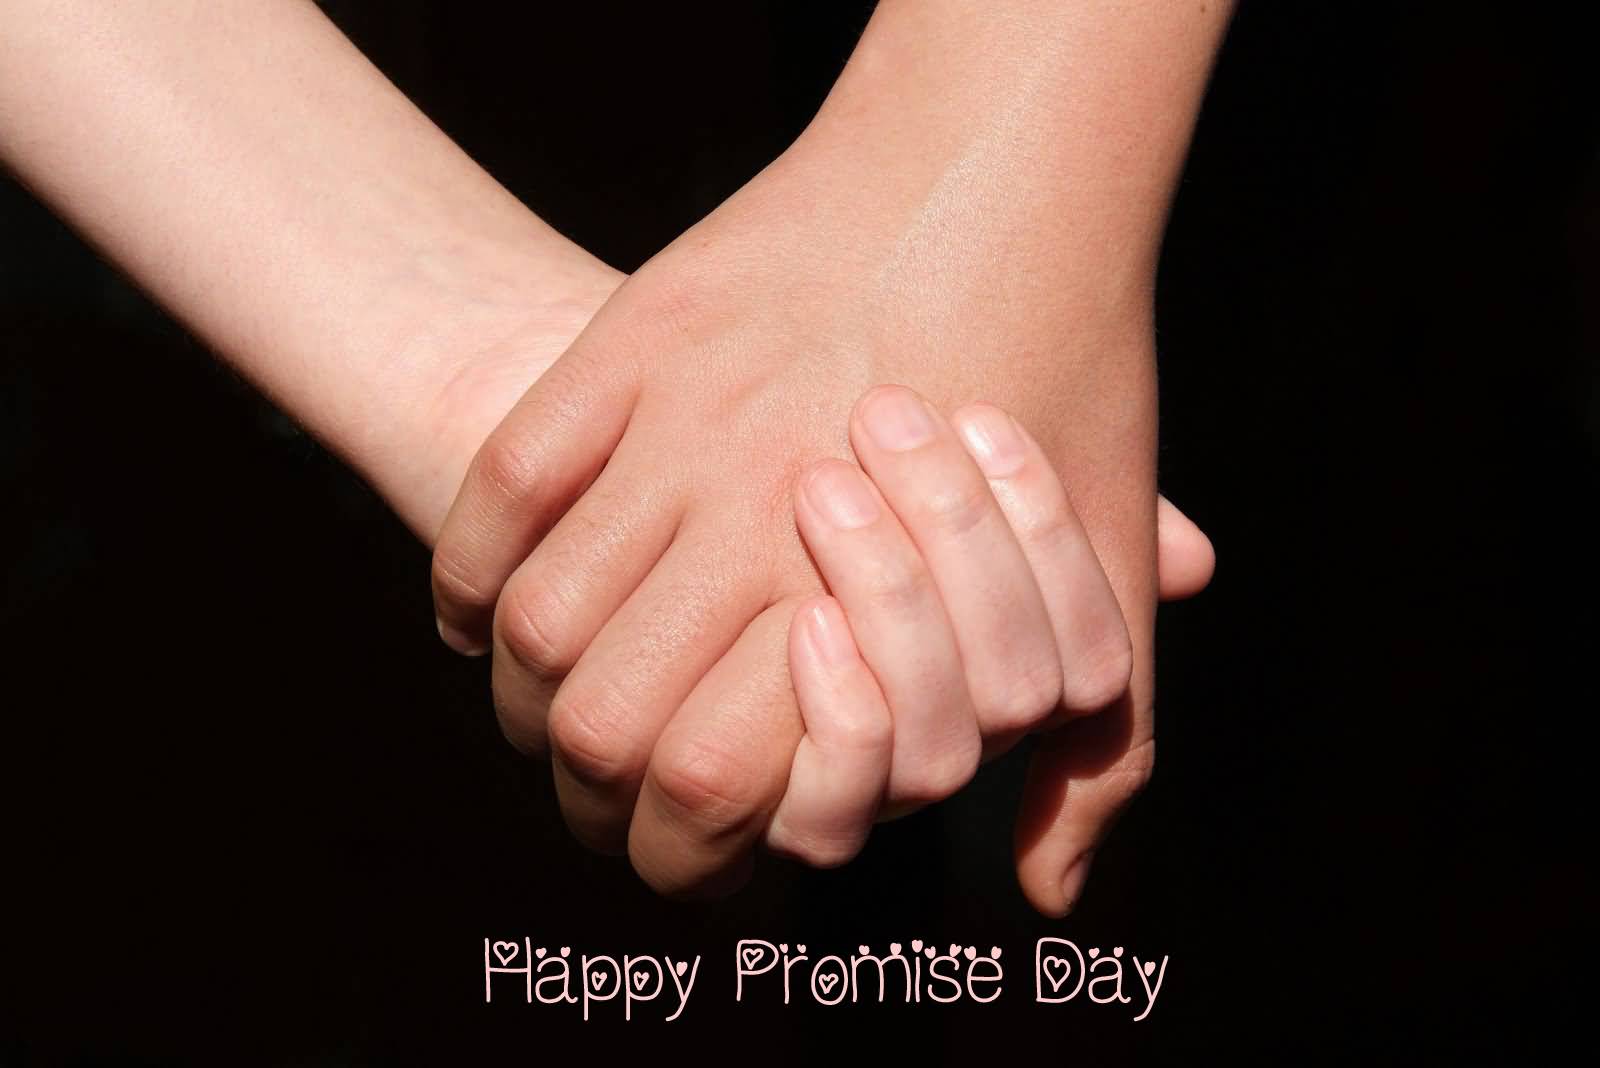 Happy Promise Day 2017 holding Hands